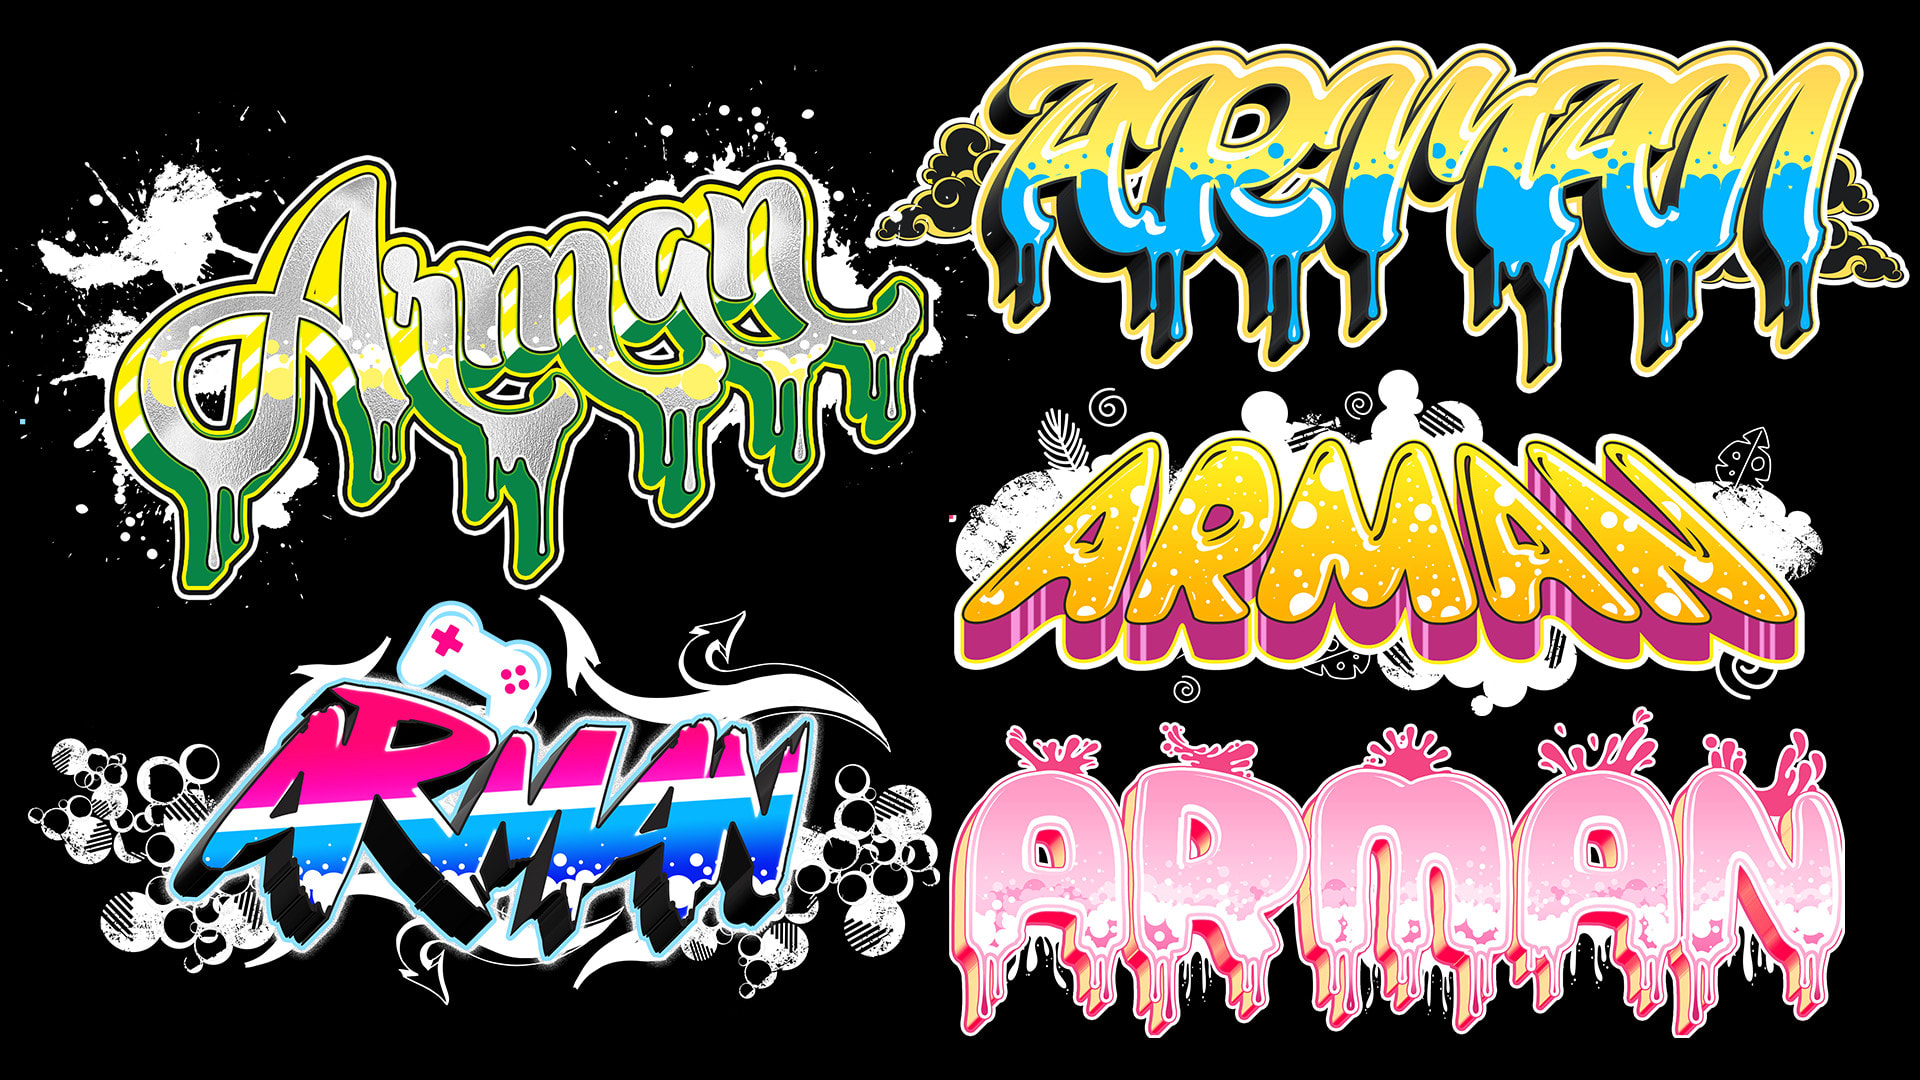 Design Awesome 3d Typography Logo With Your Name Or Text In Graffiti Art Style By Karaoke Fiverr